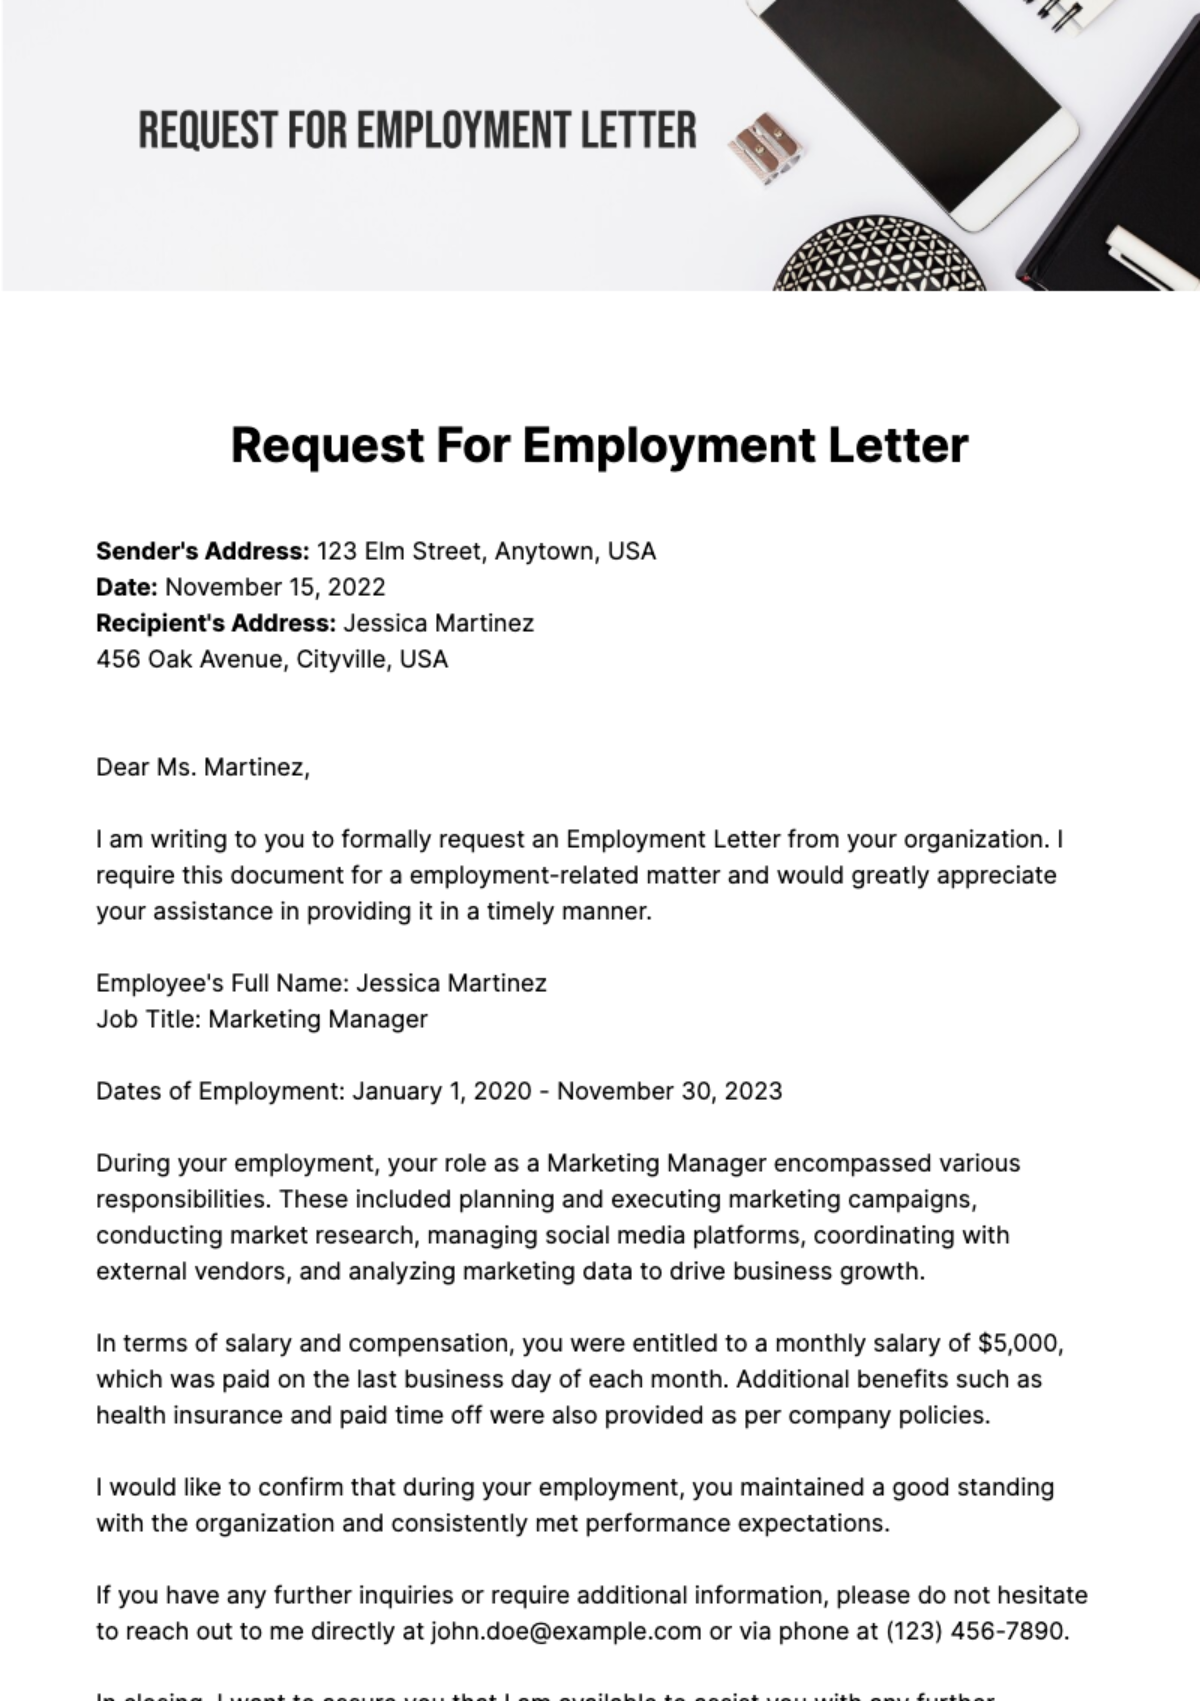 Free Request For Employment Letter Template